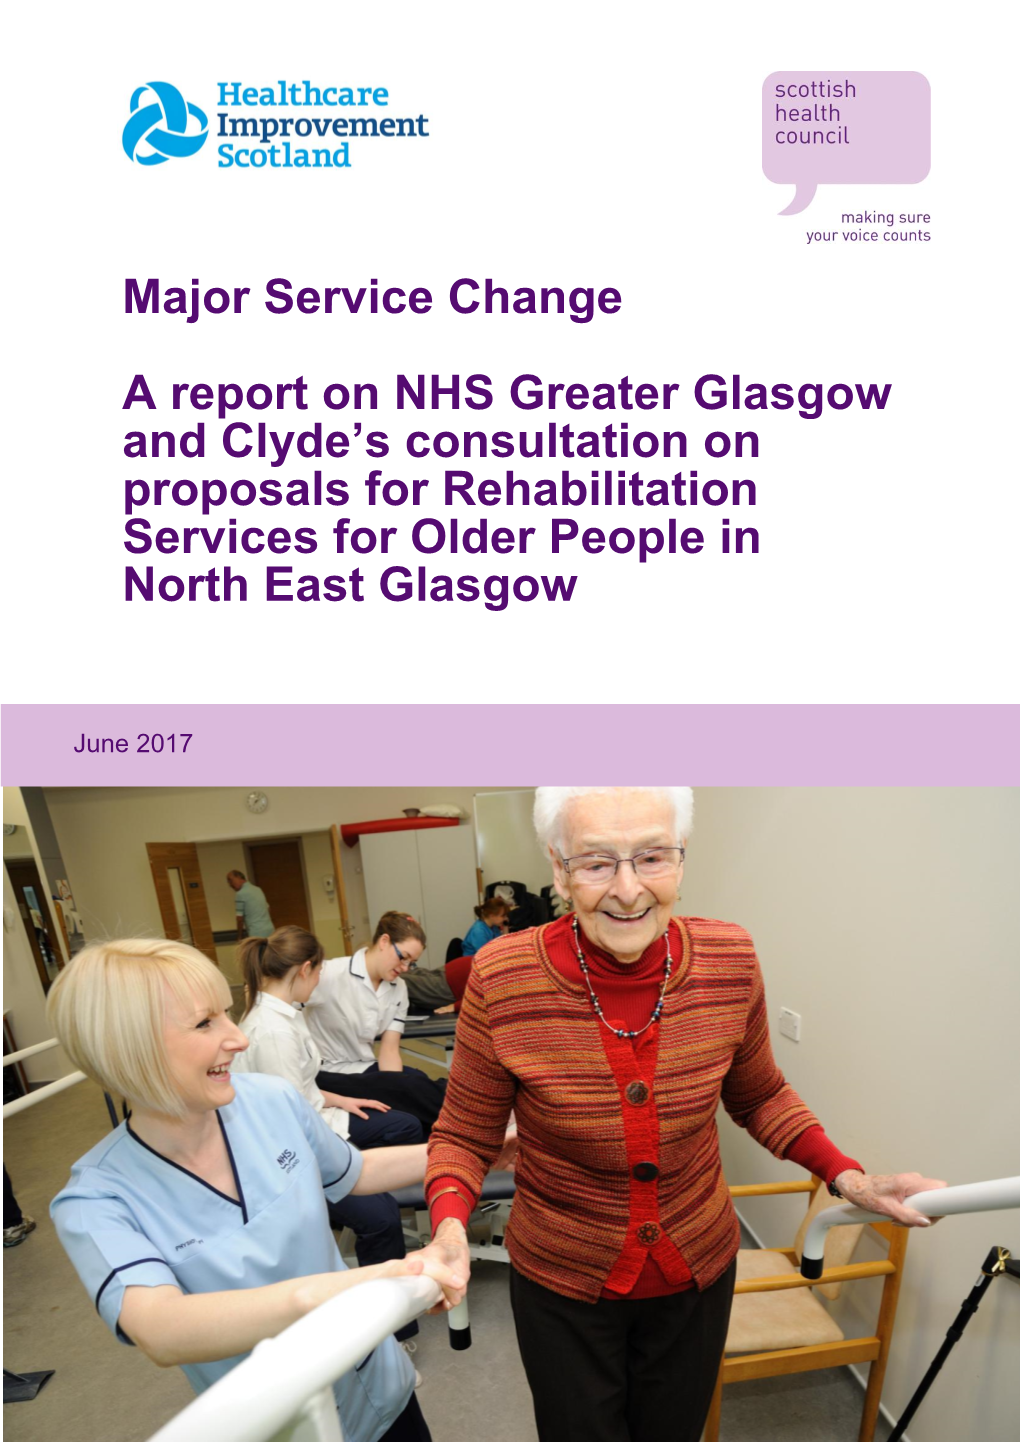 Major Service Change a Report on NHS Greater Glasgow and Clyde's